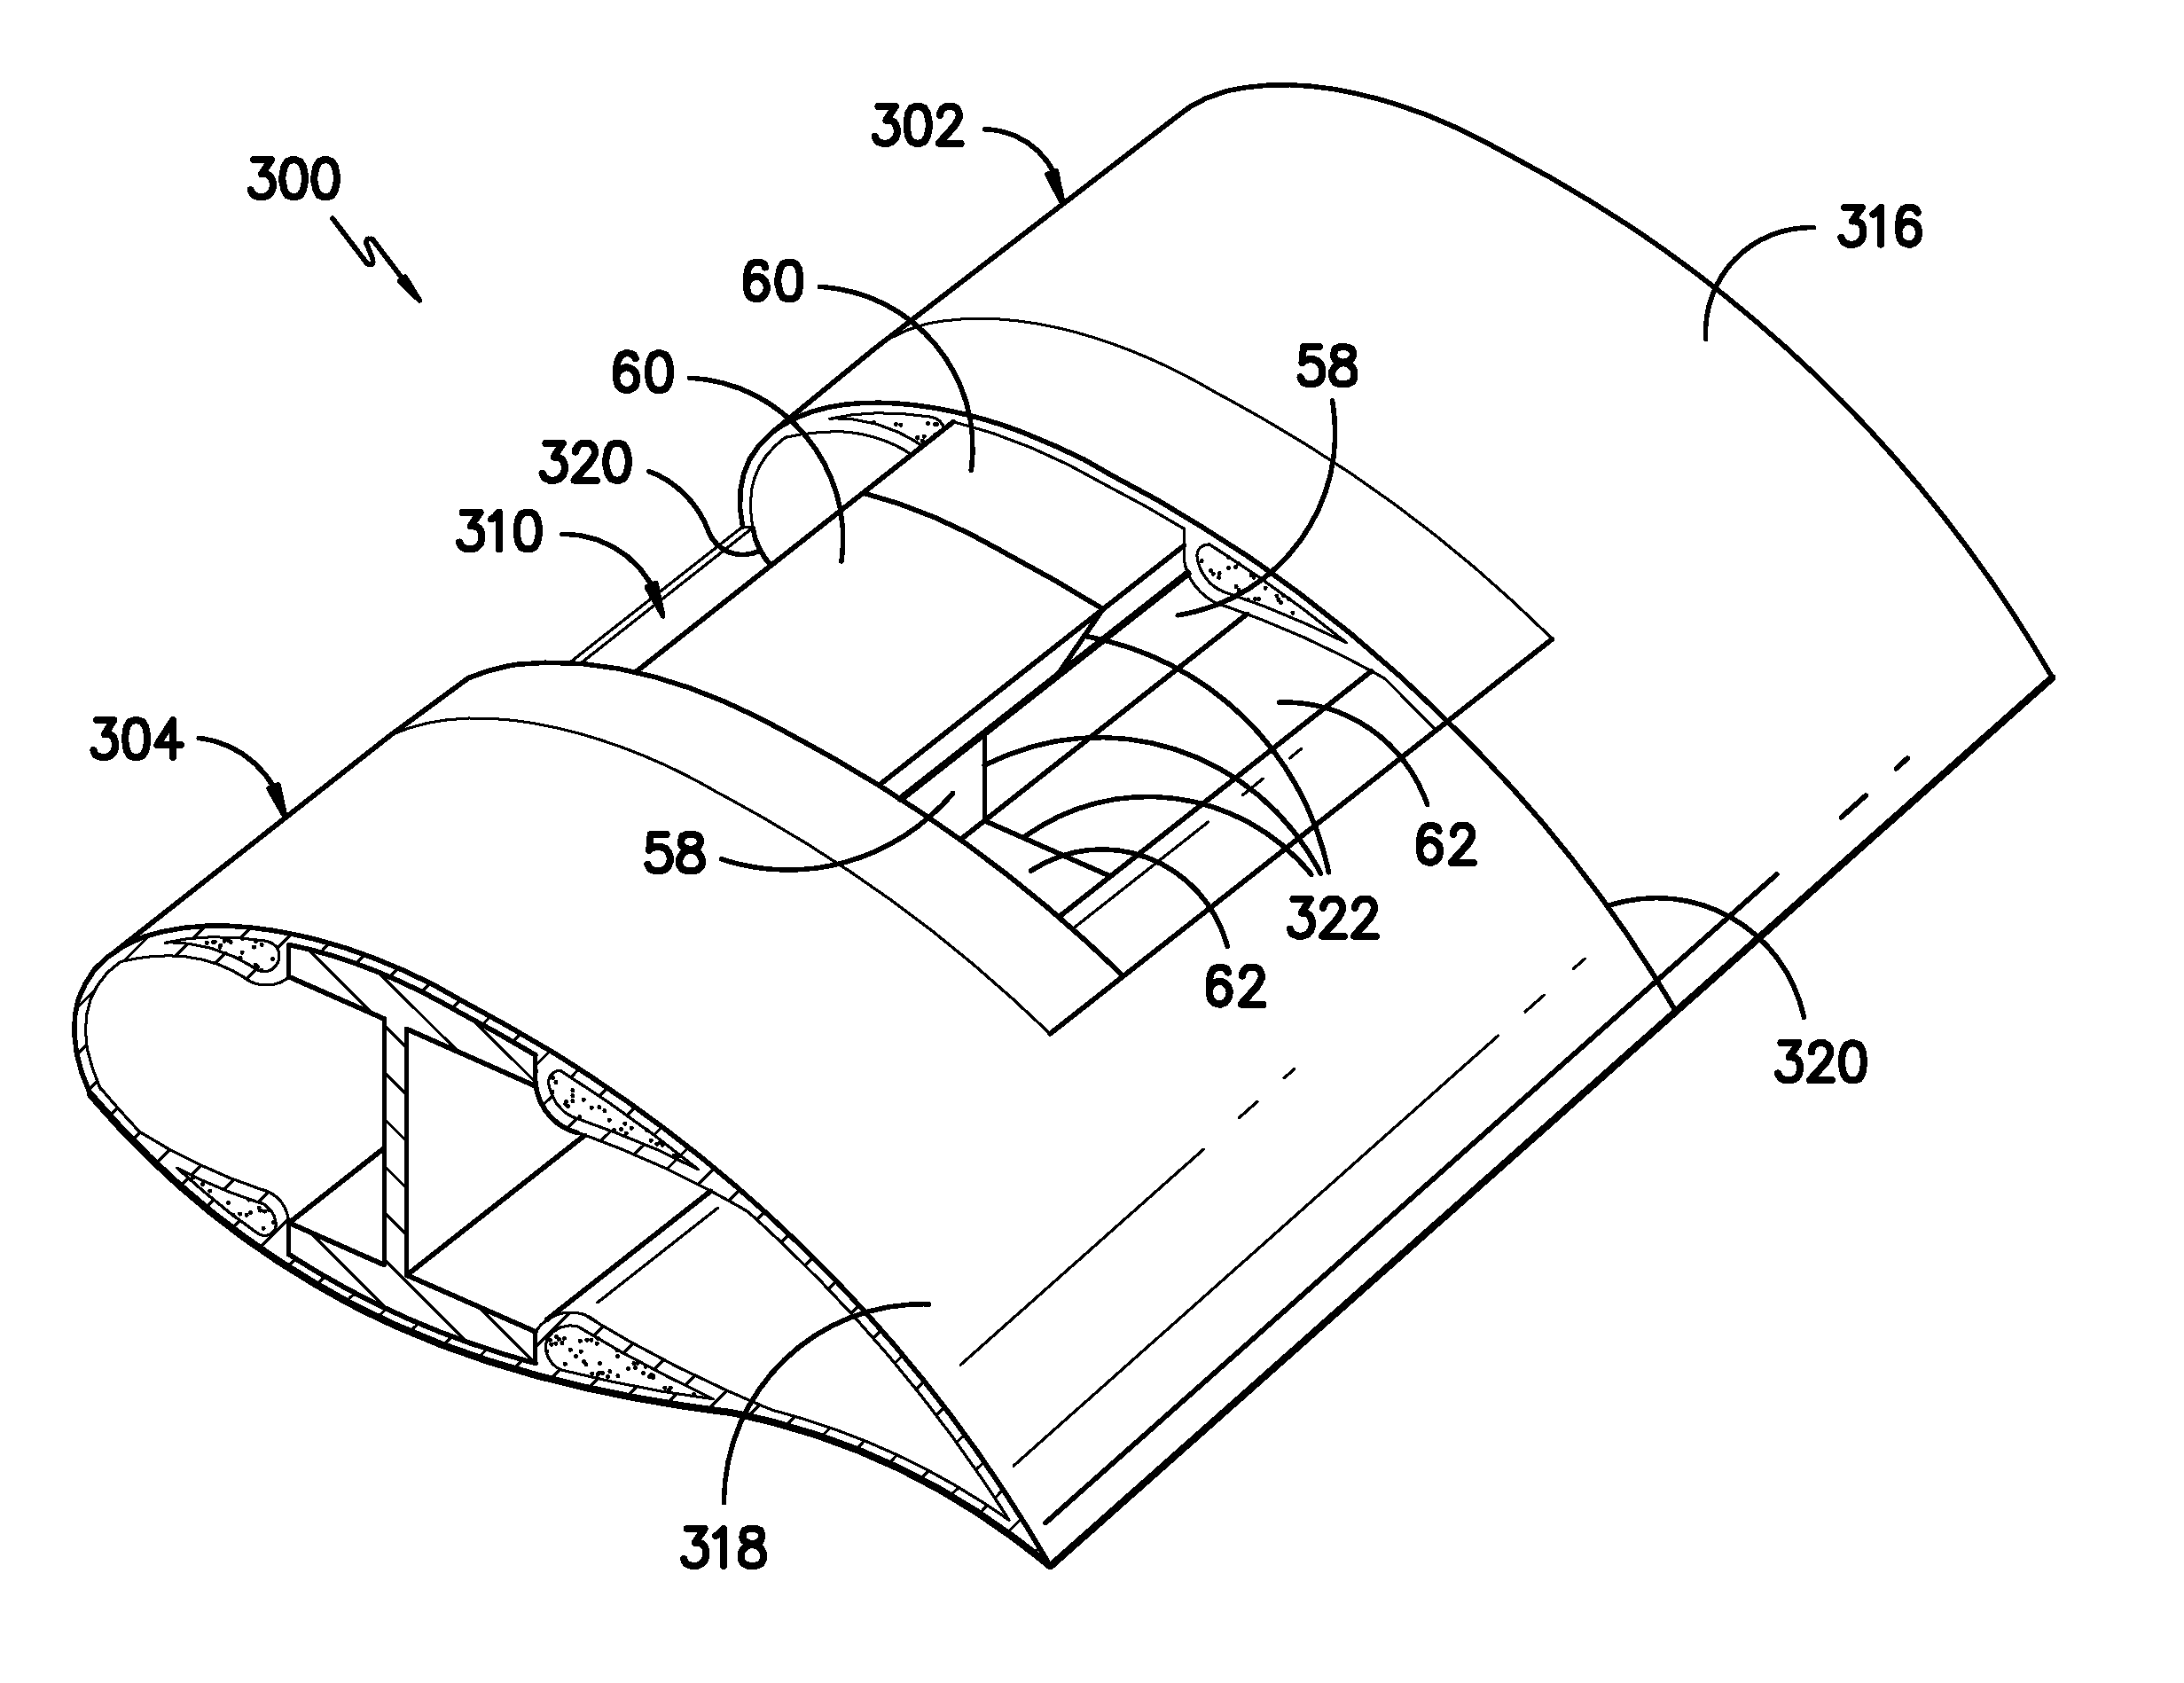 Wind turbine rotor blade assembly having an access window and related methods